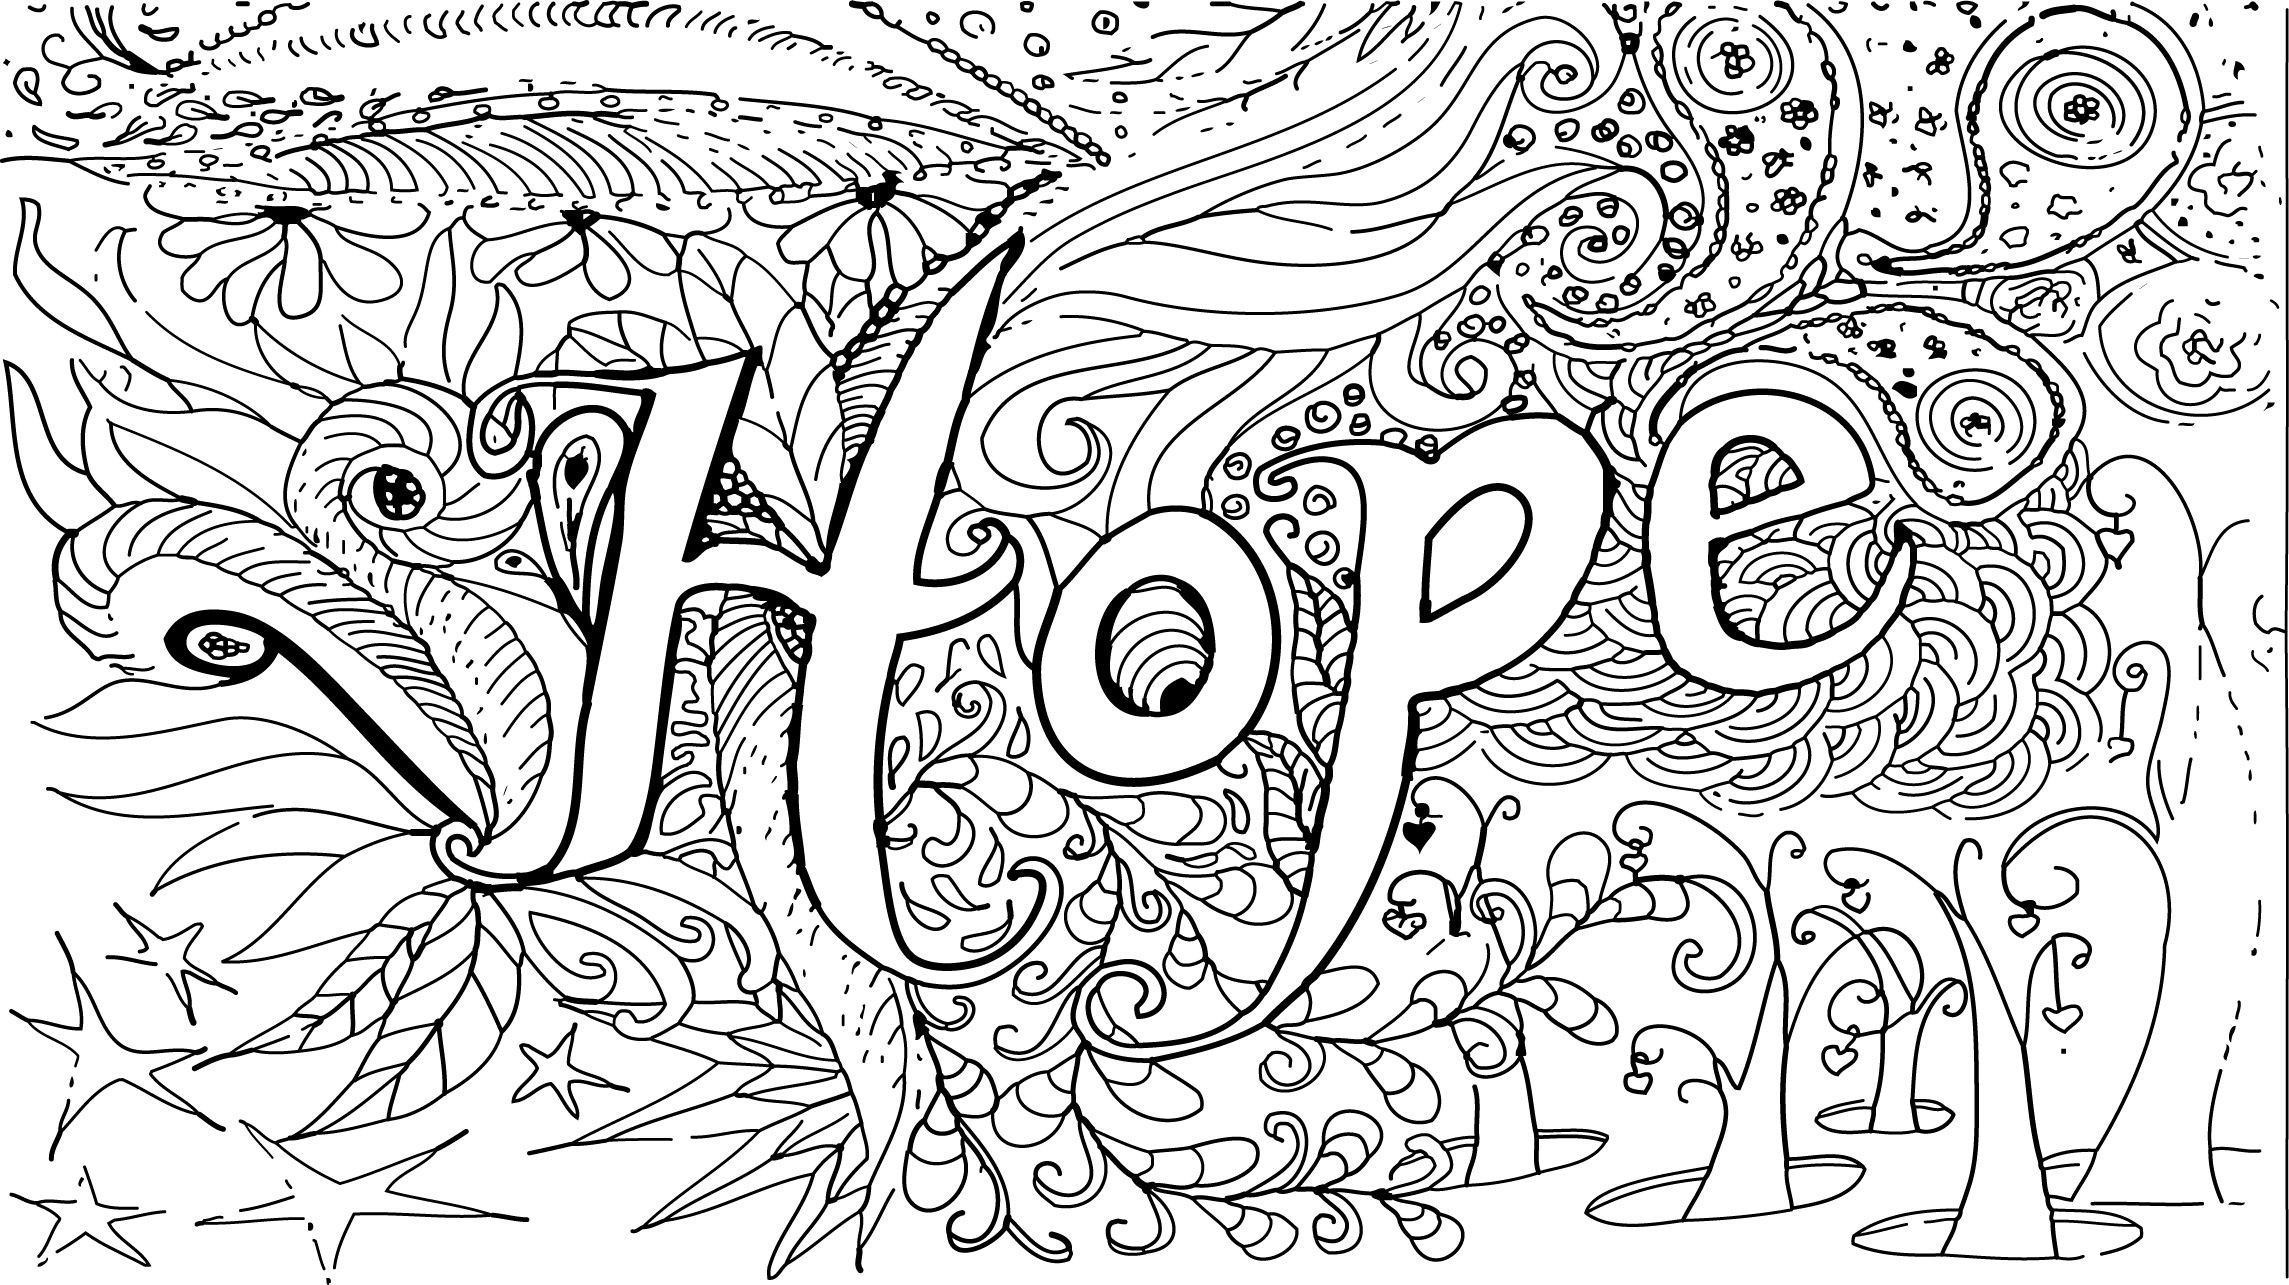 Hard Coloring Pages For Girls
 hard coloring page hope inspiration coloring book free